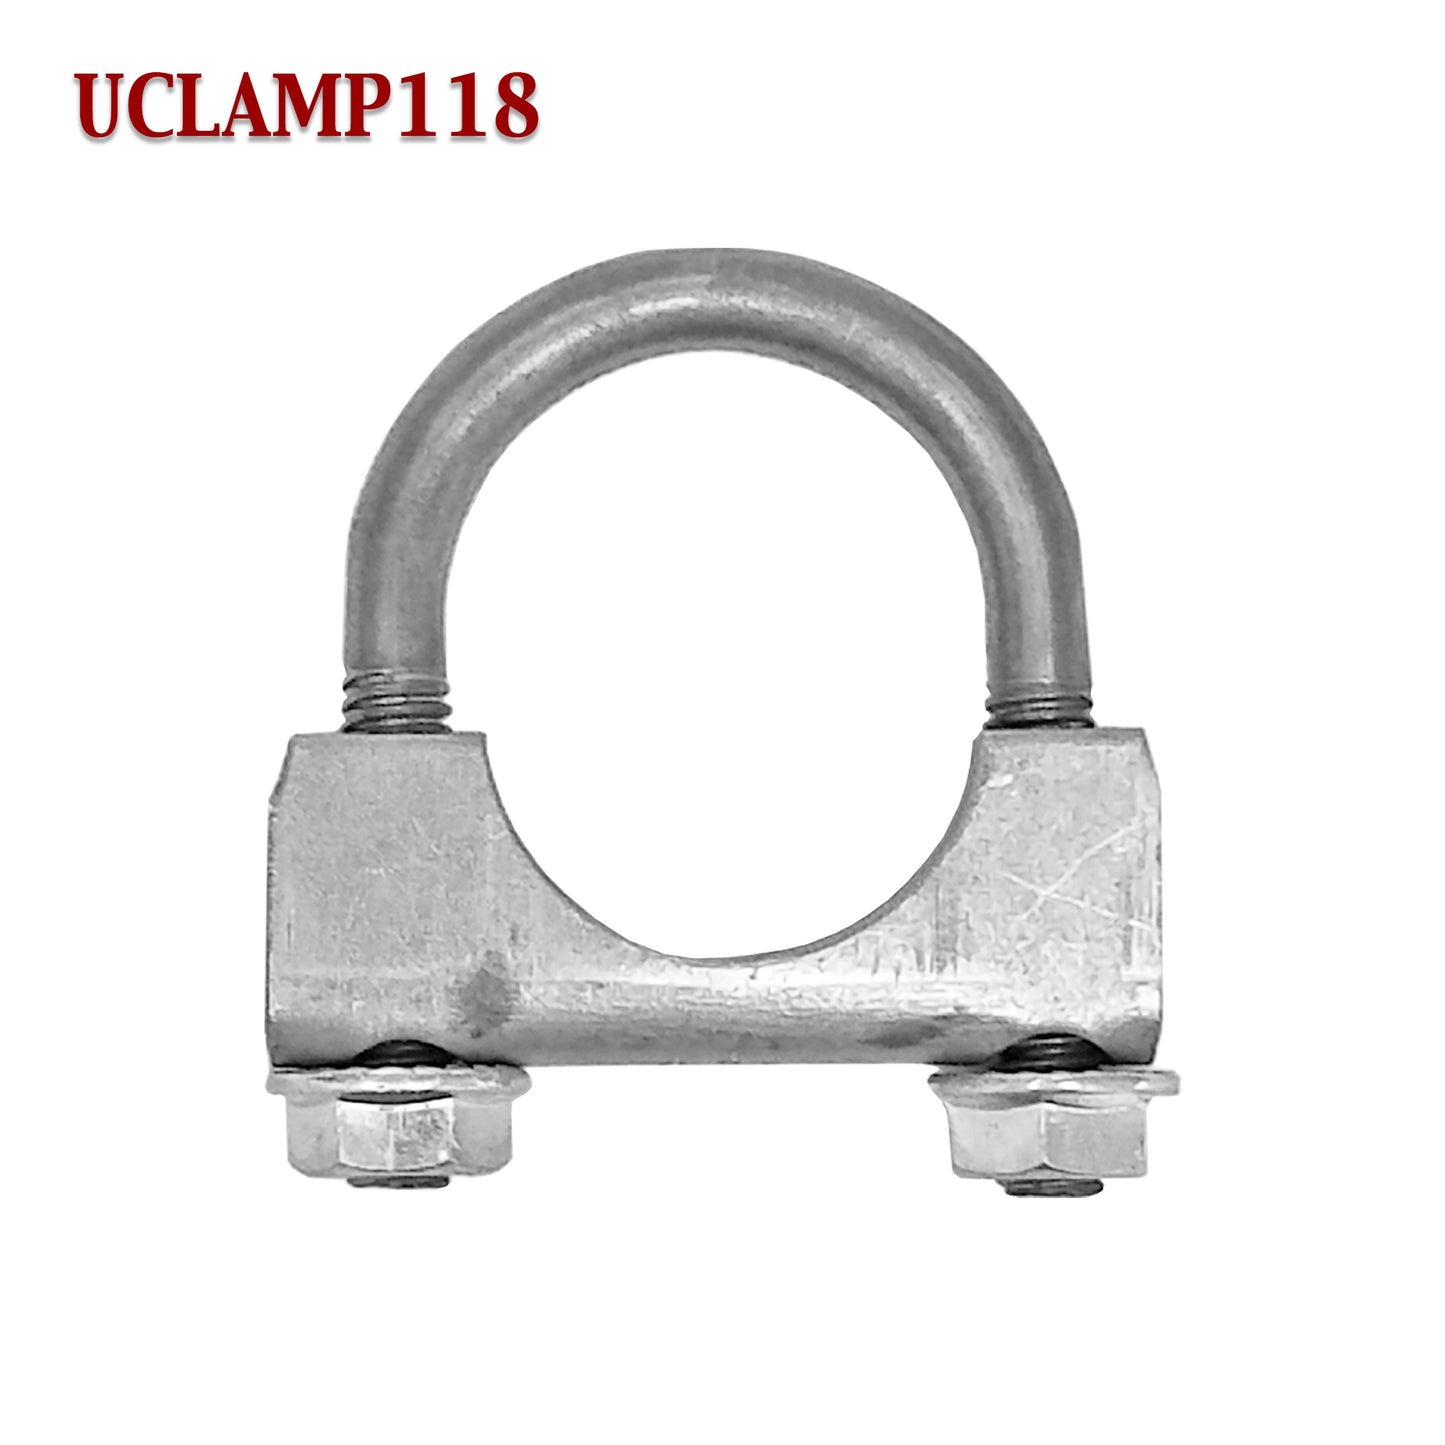 1 1/8" Exhaust Muffler Clamp U-Bolt Saddle Style For 1.125" Pipe